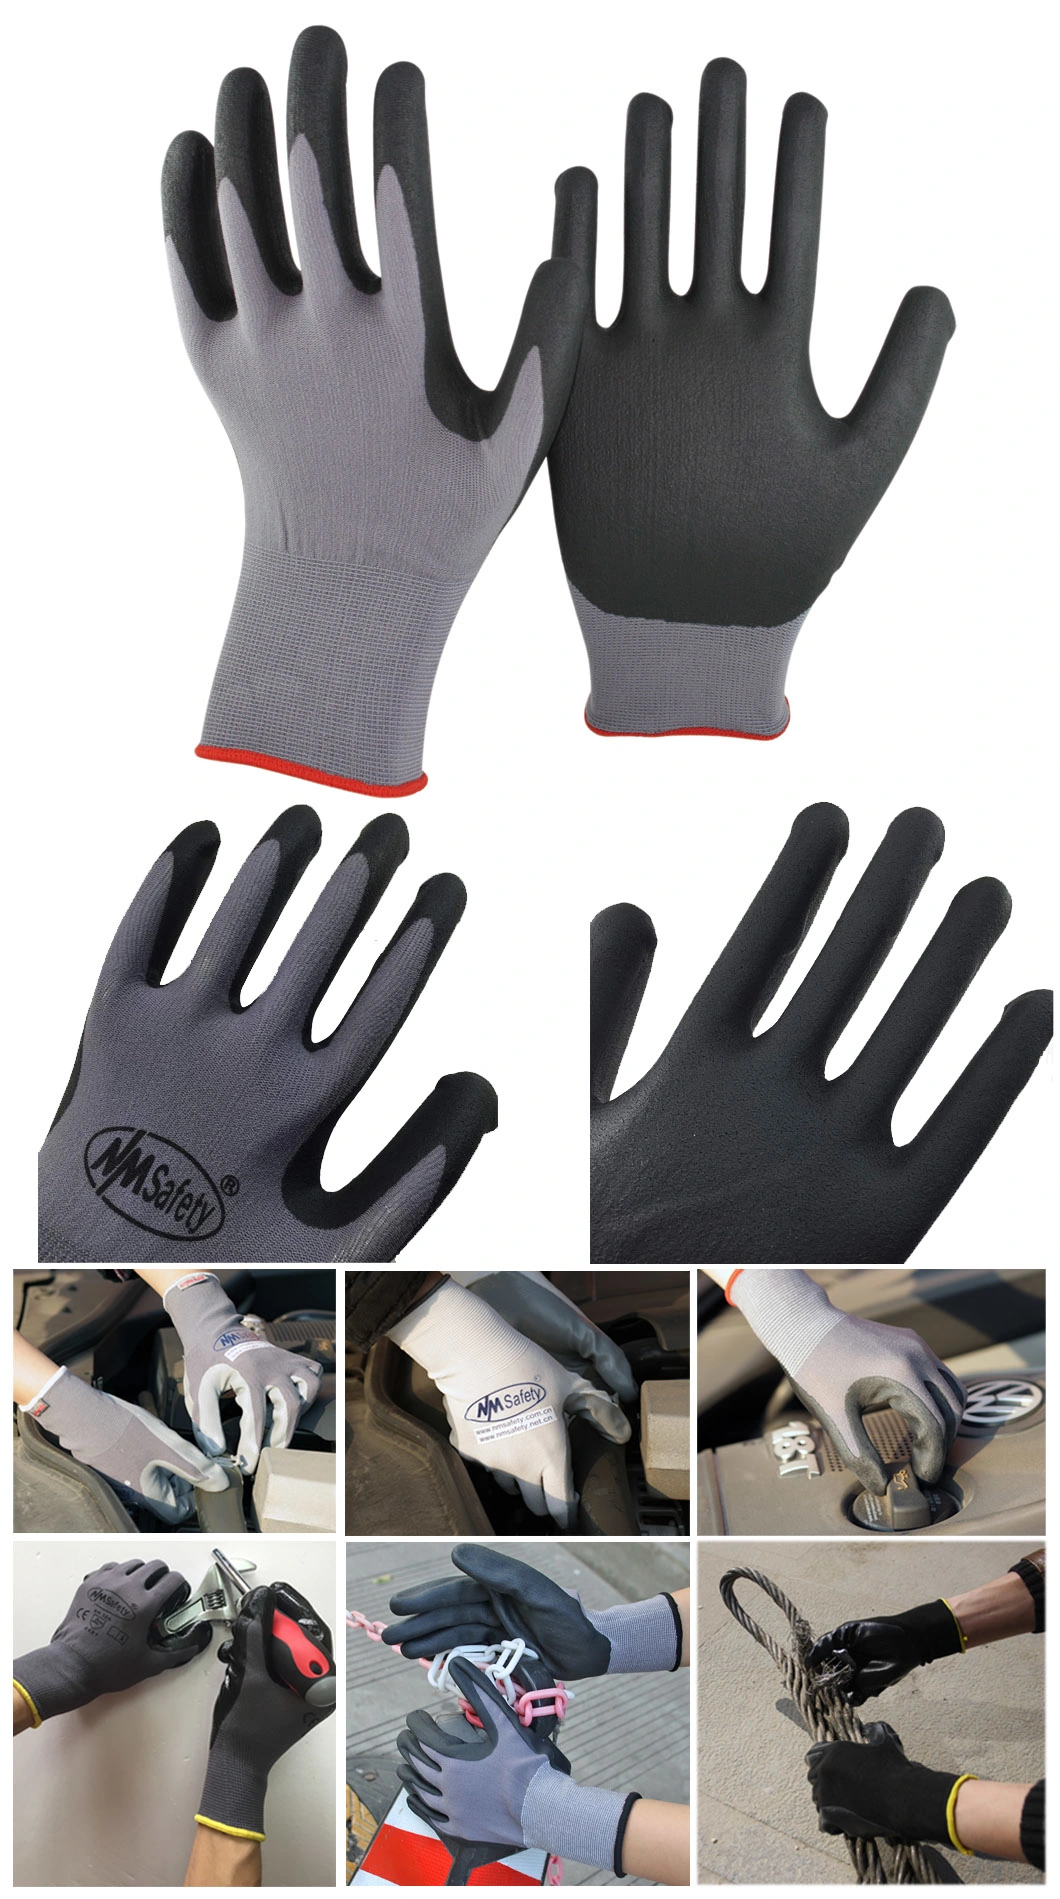 Nmsafety Micro Foam Nitrile Coated Max Flex Automotive Safety Working Glove